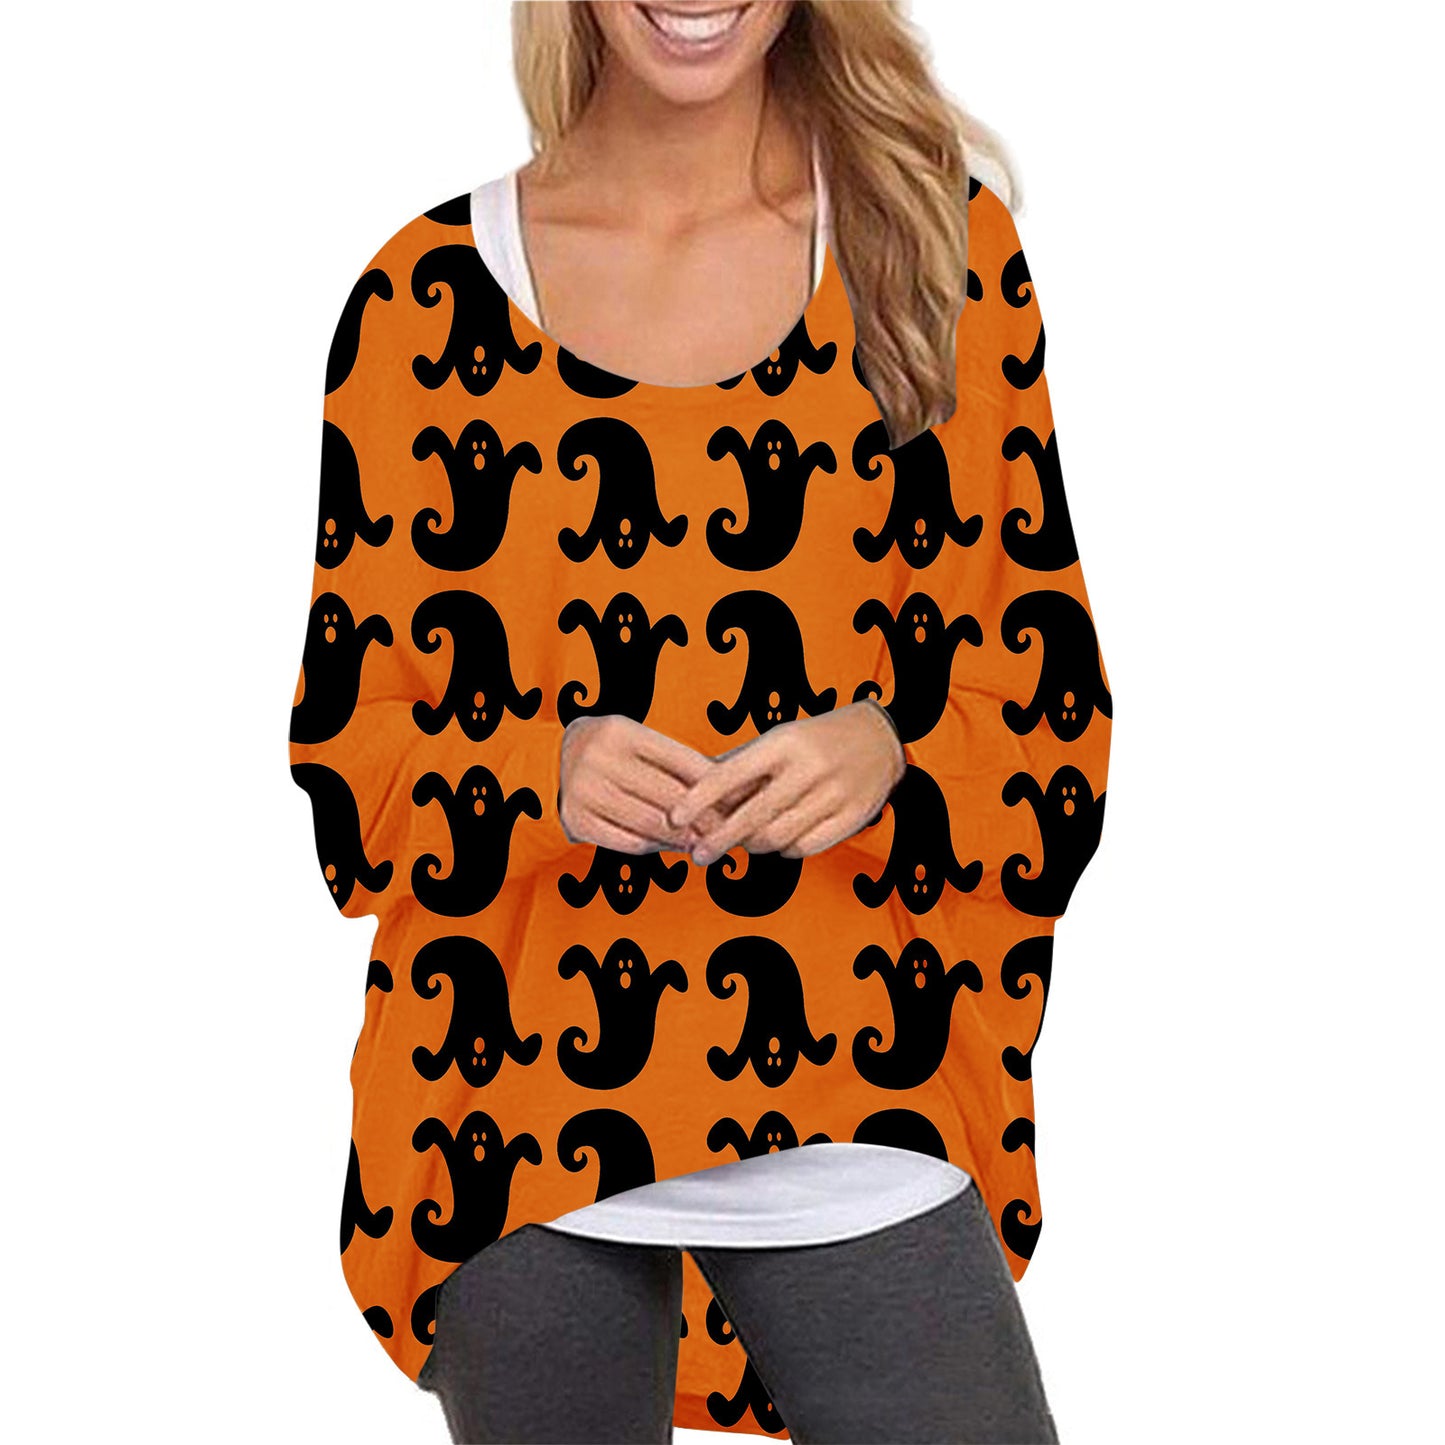 Women Halloween Pumpkin Print Long Sleeves Tops-For Halloween-Ghost-S-Free Shipping at meselling99